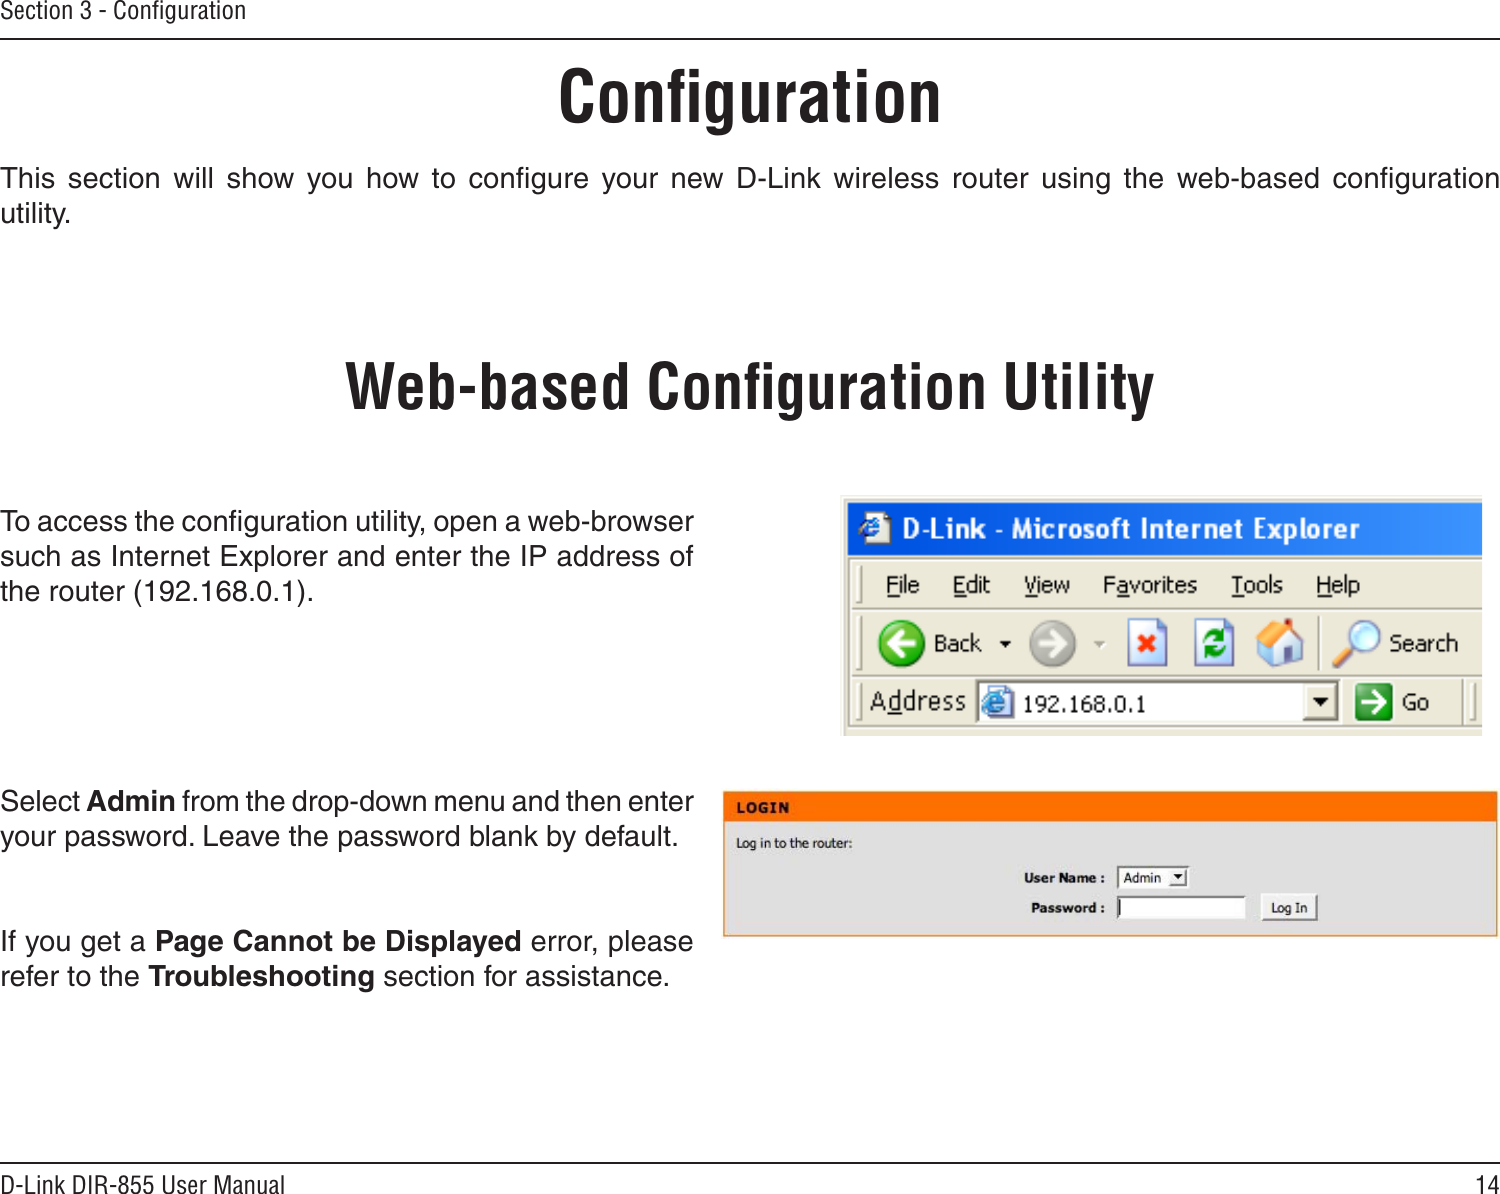 14D-Link DIR-855 User ManualSection 3 - ConﬁgurationConﬁgurationThis  section  will  show  you  how  to  conﬁgure  your  new  D-Link  wireless  router  using  the  web-based  conﬁguration utility.Web-based Conﬁguration UtilityTo access the conﬁguration utility, open a web-browser such as Internet Explorer and enter the IP address of the router (192.168.0.1).Select Admin from the drop-down menu and then enter your password. Leave the password blank by default.If you get a Page Cannot be Displayed error, please refer to the Troubleshooting section for assistance.